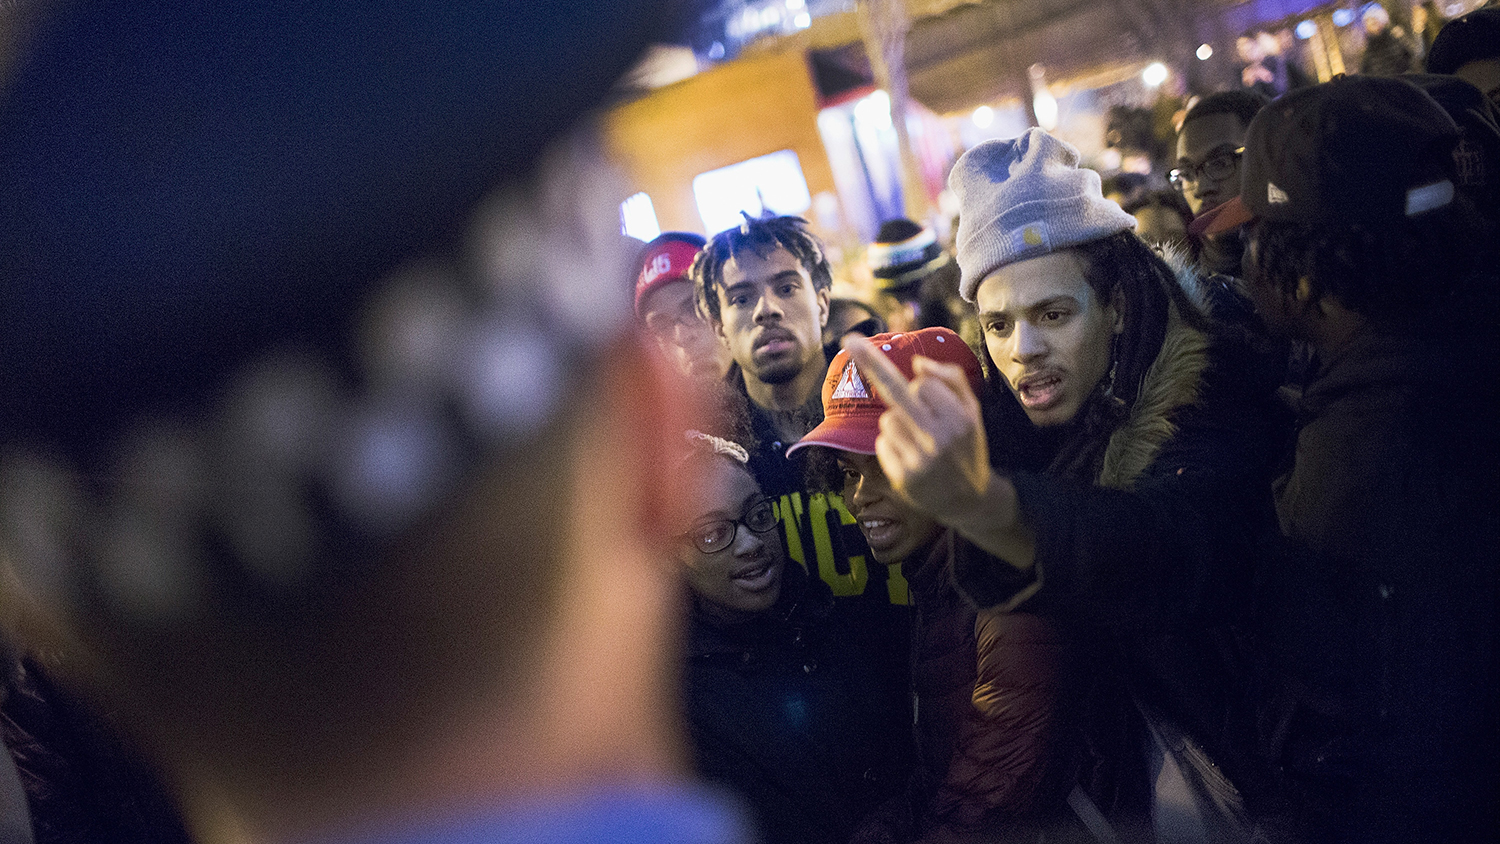 Demonstrators confront police in Chicago following the release of a video on Nov. 24, 2015, showing officer Jason Van Dyke shooting and killing Laquan McDonald.
